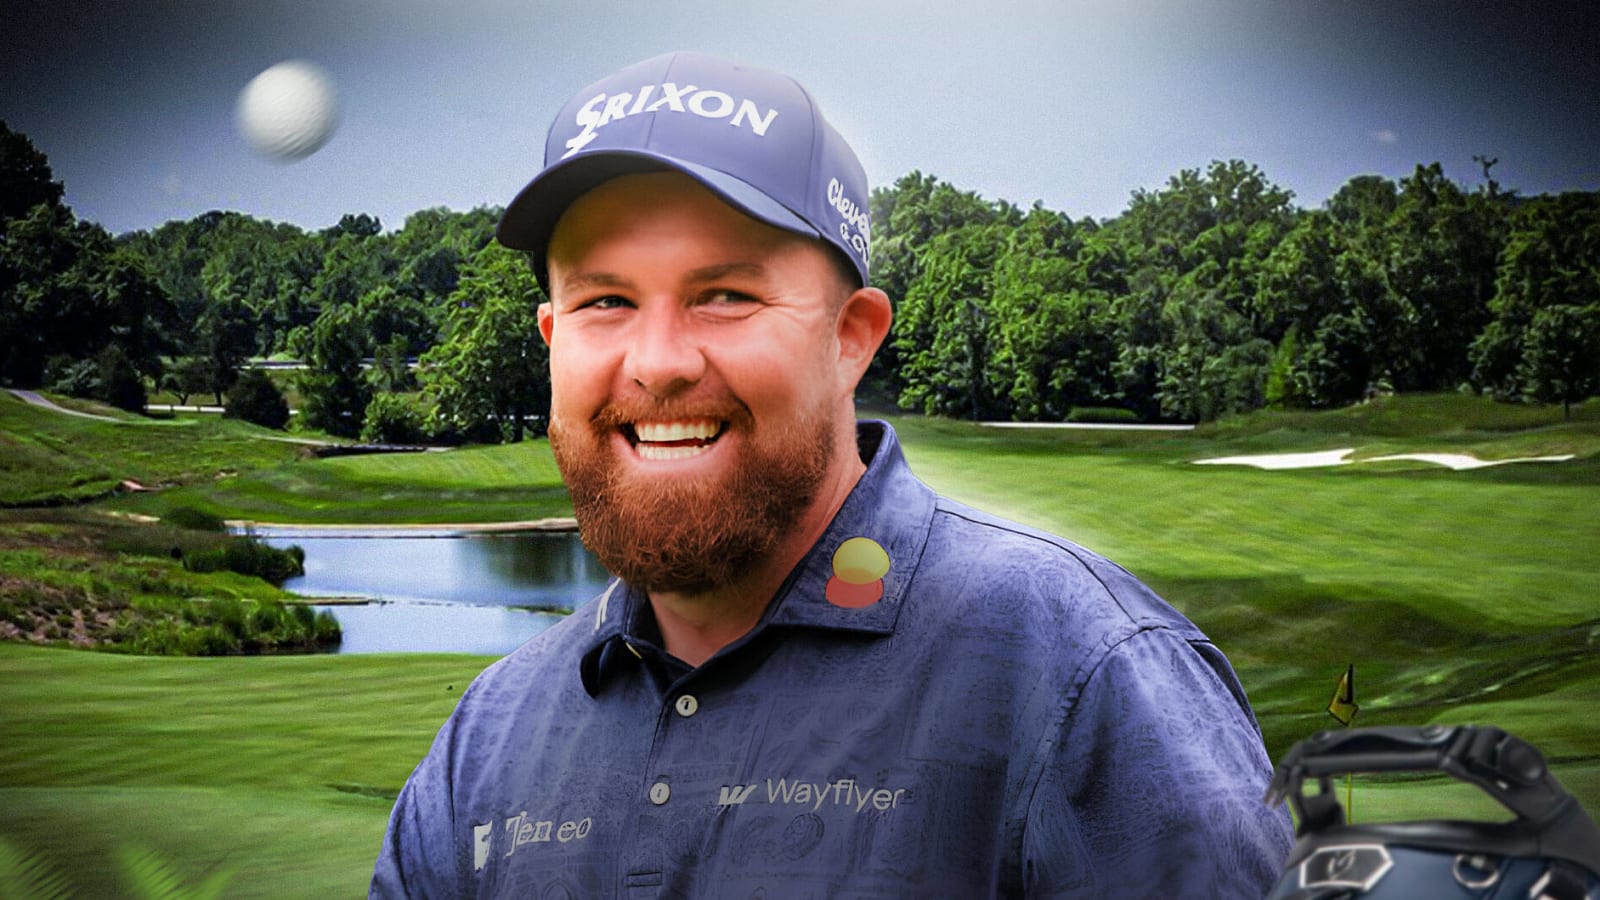 Shane Lowry fires 62 at Valhalla, ties all-time record for lowest score at Major